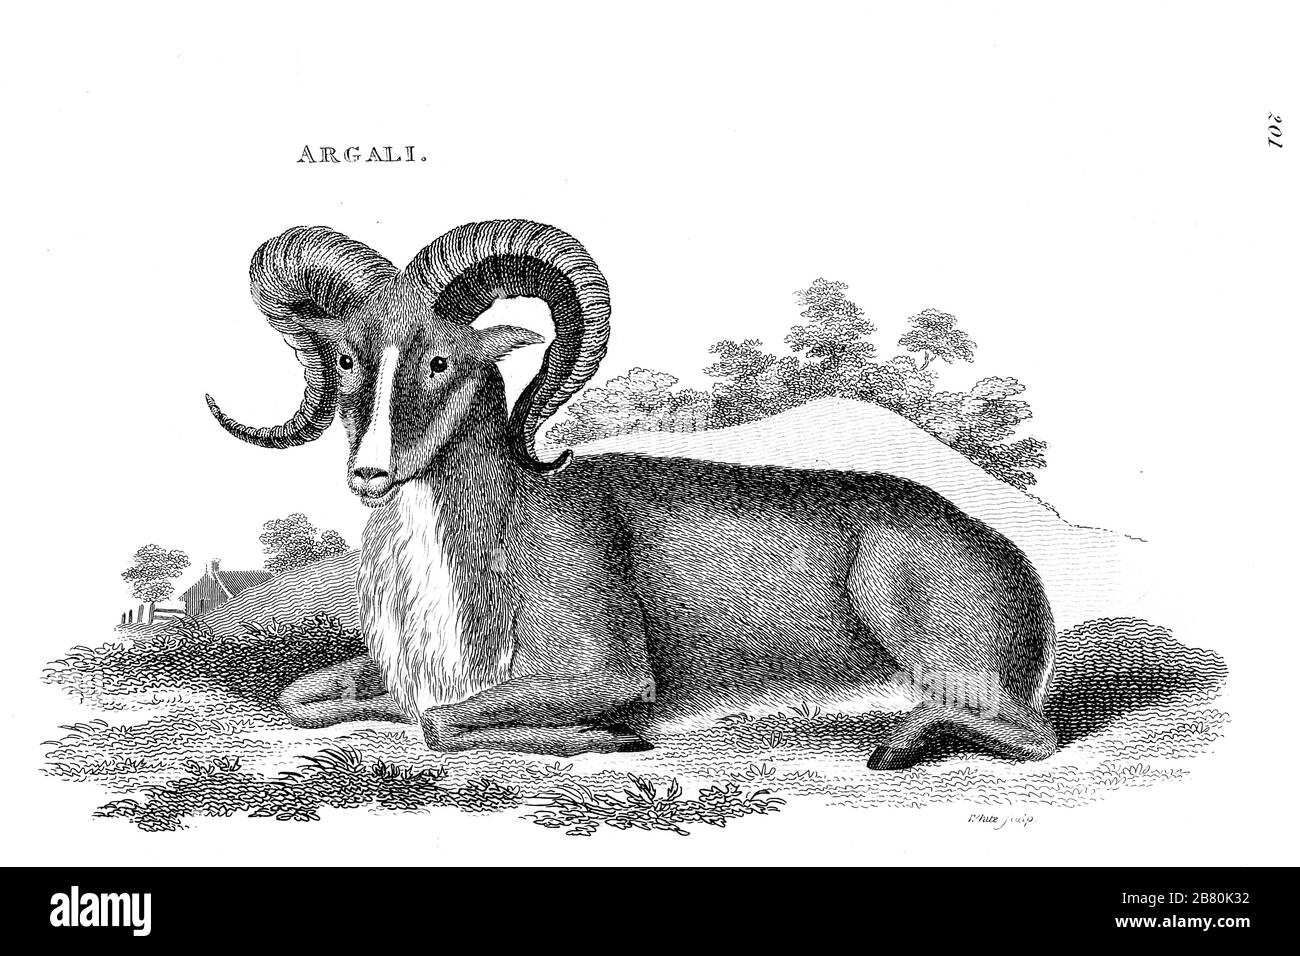 argali, mountain sheep (Ovis ammon) from General zoology, or, Systematic natural history Vol II Part 2 Mammalia, by Shaw, George, 1751-1813; Stephens, James Francis, 1792-1853; Heath, Charles, 1785-1848, engraver; Griffith, Mrs., engraver; Chappelow. Copperplate Printed in London in 1801 by G. Kearsley Stock Photo